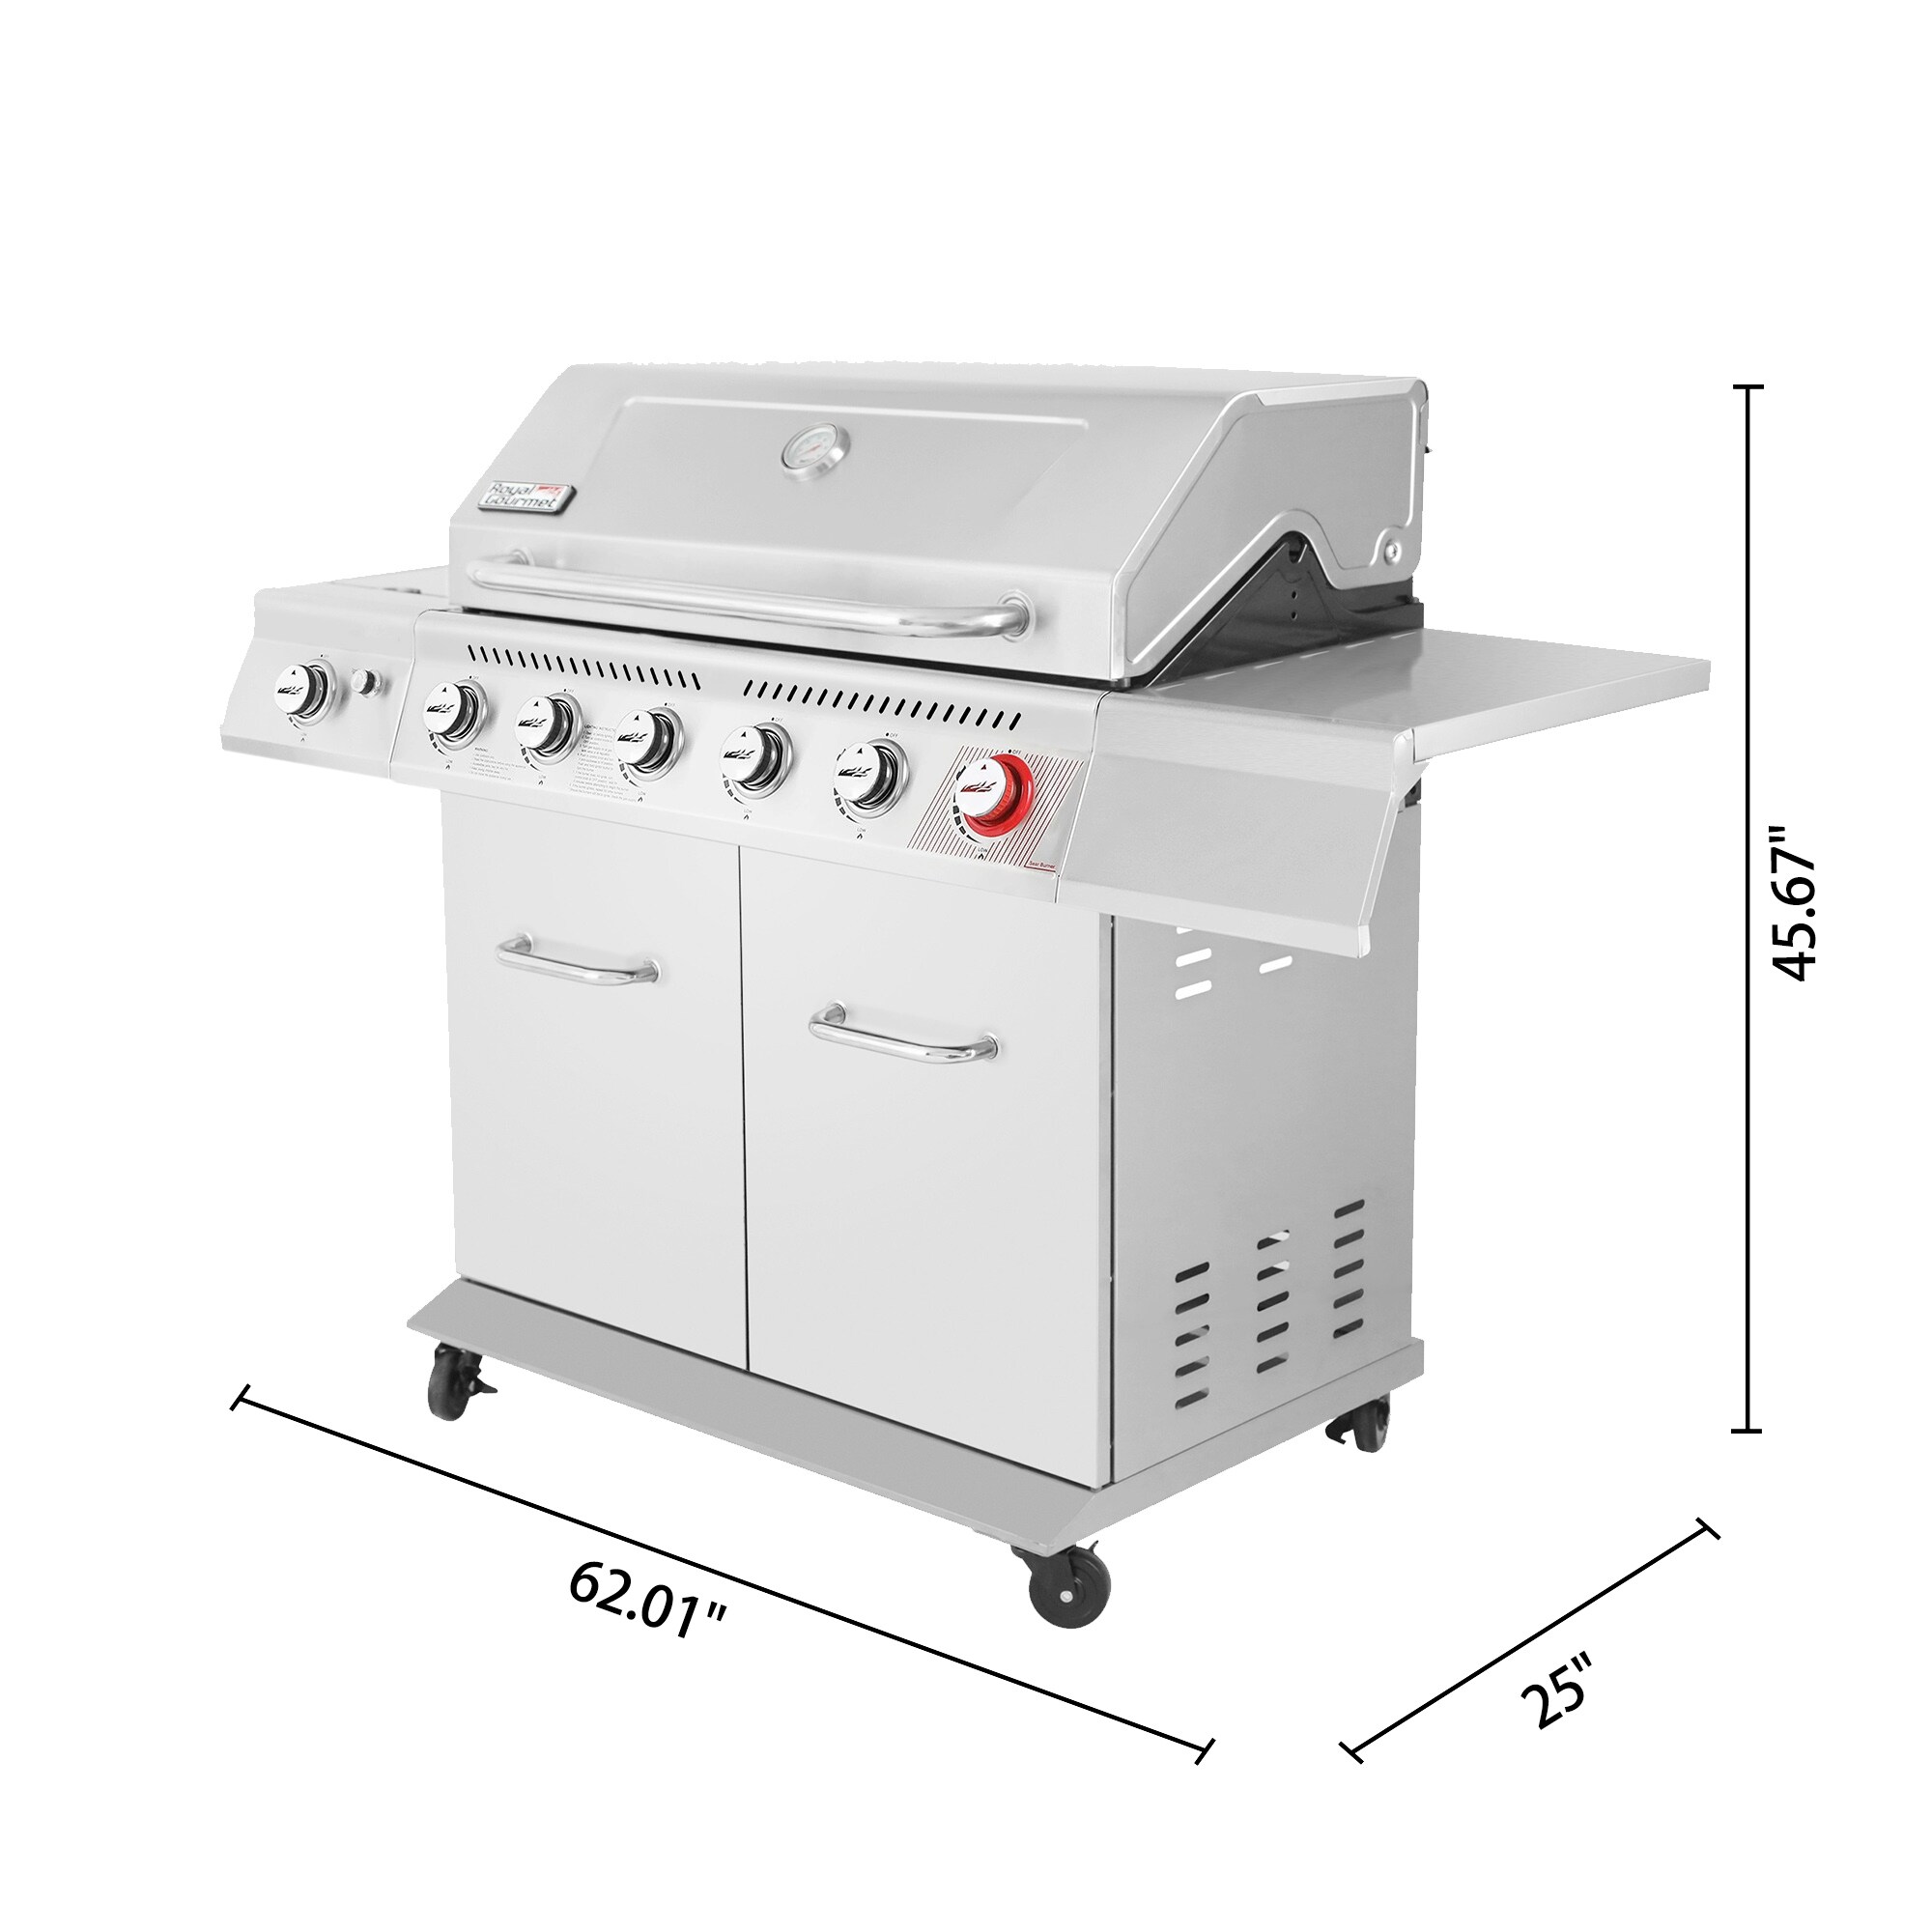 Grill Royal Bath Grill, On - Sear Bed Gourmet Burner, with Silver BBQ Sale Burner Beyond - Premier 6-Burner 36898562 Side Stainless & Steel - Gas and